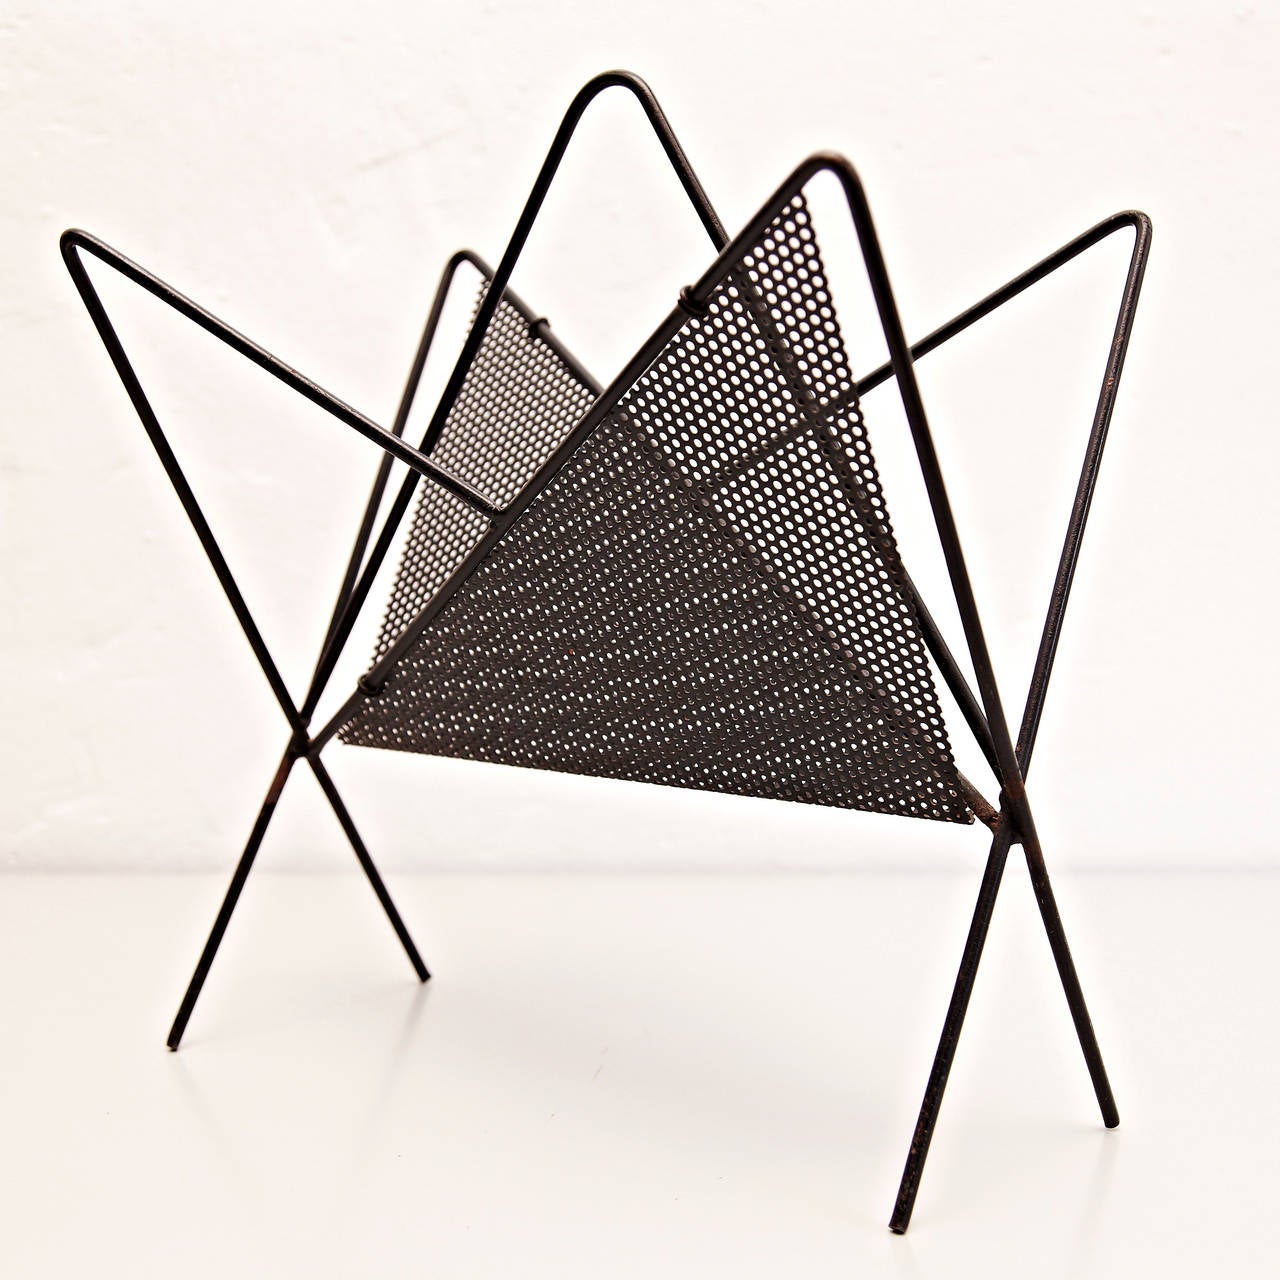 Magazine holder, model Harpers, designed by Mathieu Matégot.
Manufactured by ateliers Matégot (France), circa 1950.
Folded, perforated metal.

In good original condition, with minor wear consistent with age and use, preserving a beautiful